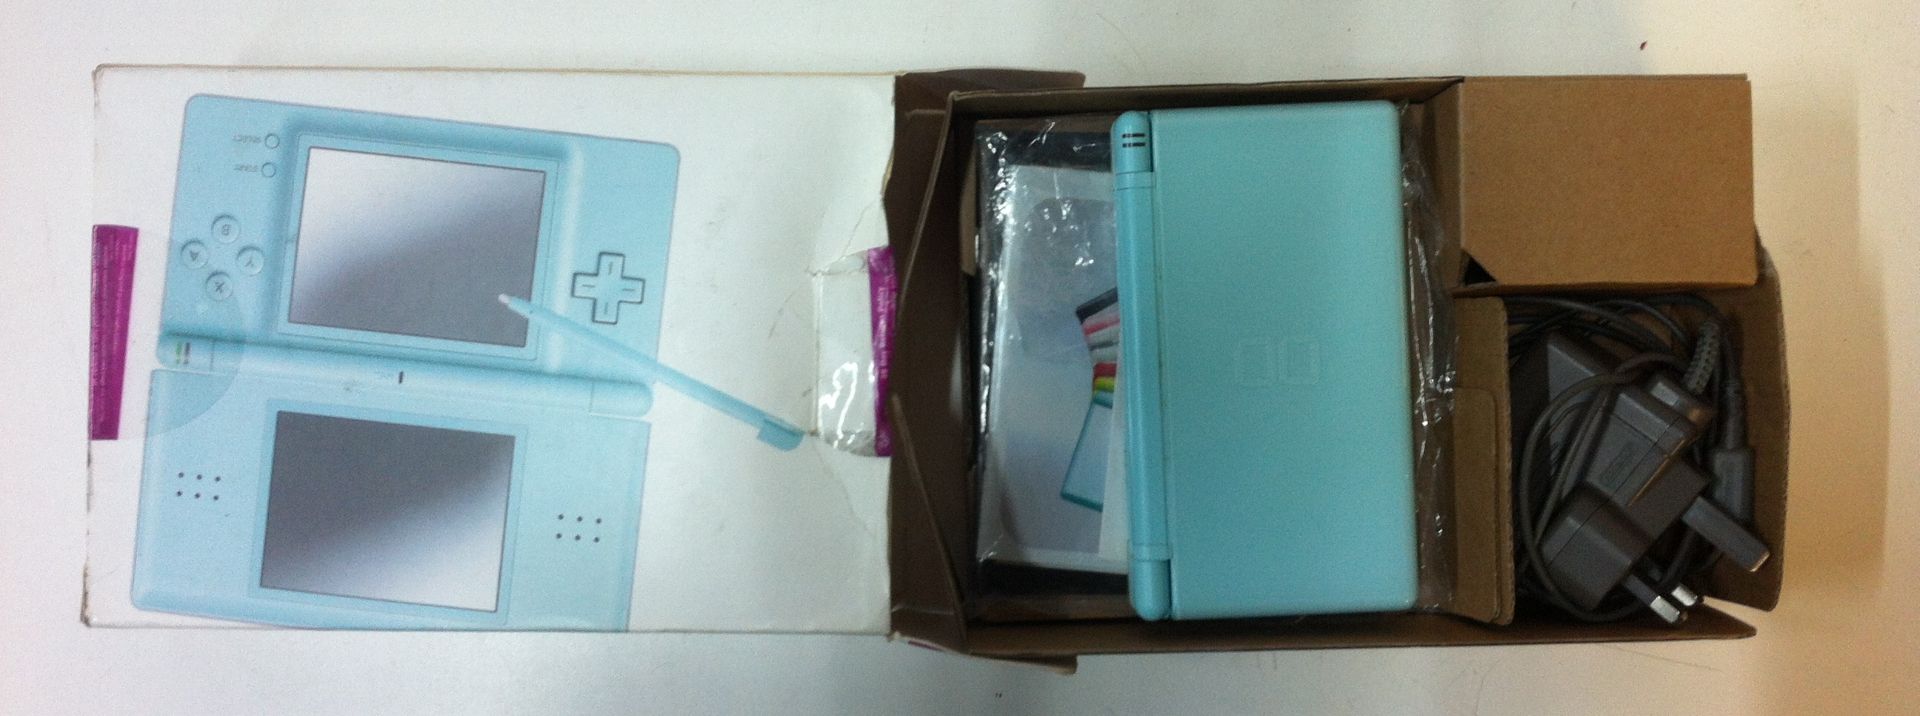 2 x Nintendo DS Lite Consoles w/ Games & Sony Playstation Portable Console - Please See Description. - Image 2 of 2